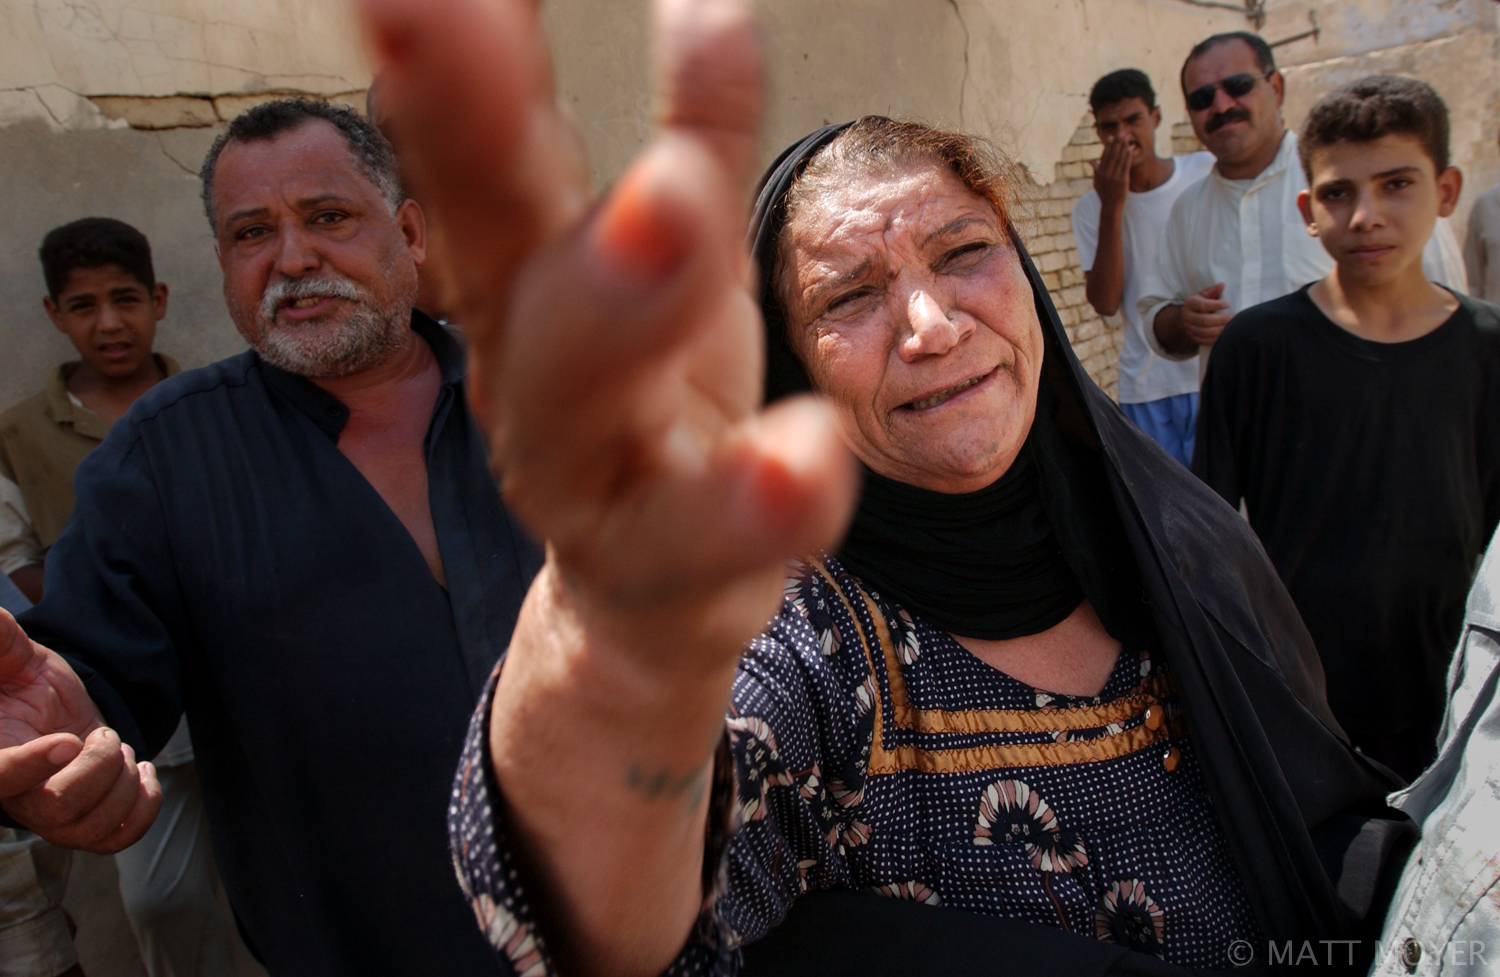  An Iraqi woman cries after having her home ransacked by a mob that attacked a group of brothels and beer sellers in her run down neighborhood in Basra, Iraq. The mob, made up of men and boys from the neighborhood and a few Islamists, threw stones at